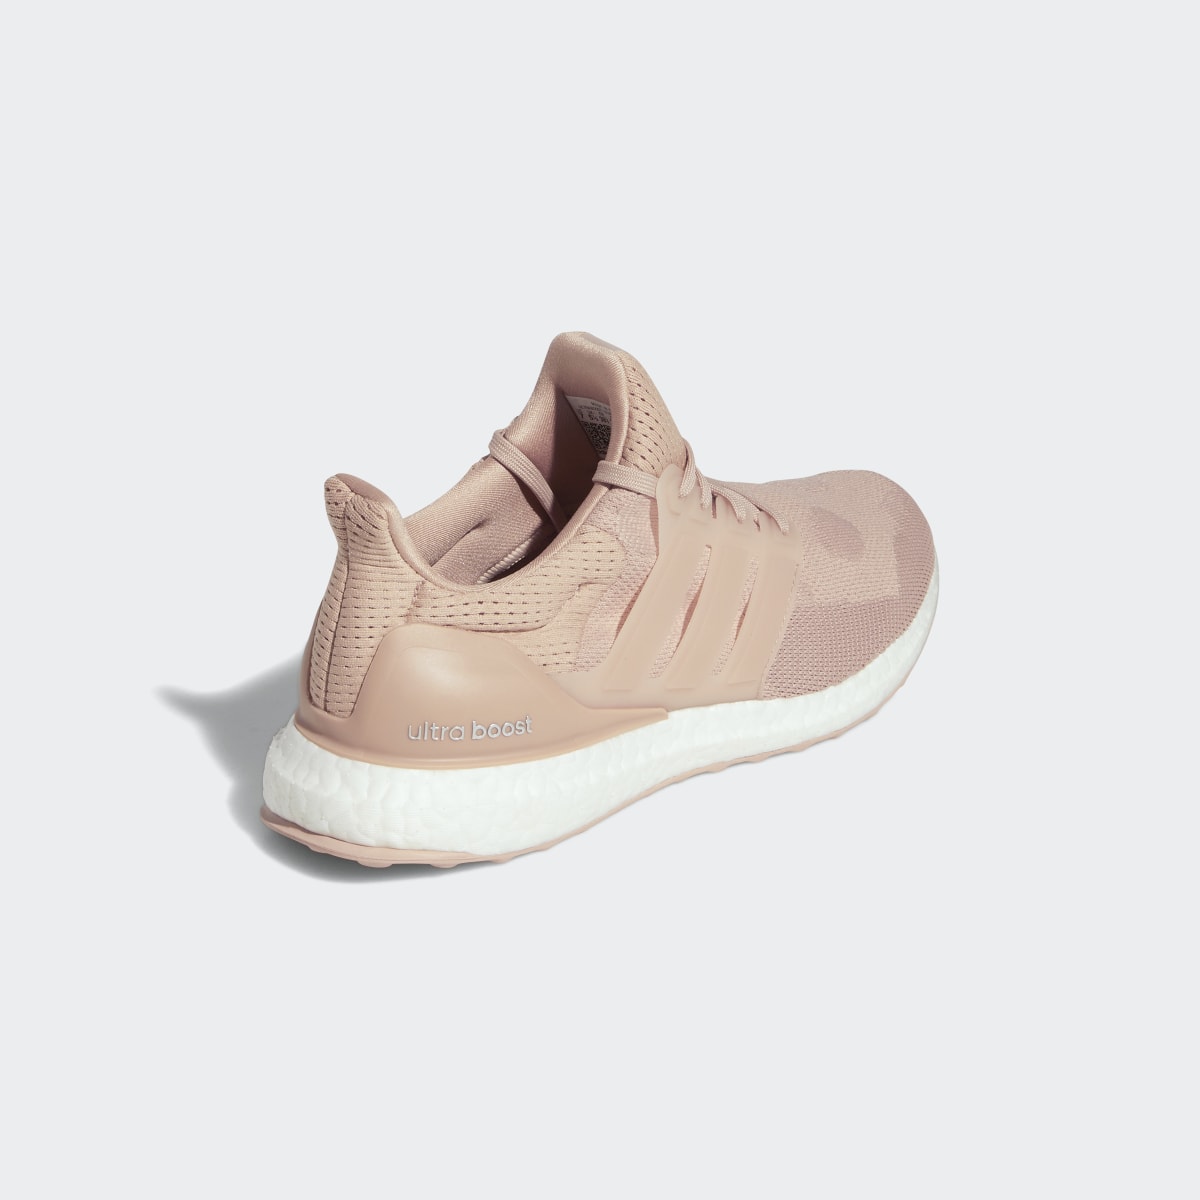 Adidas Ultraboost 1.0 DNA Shoes. 8